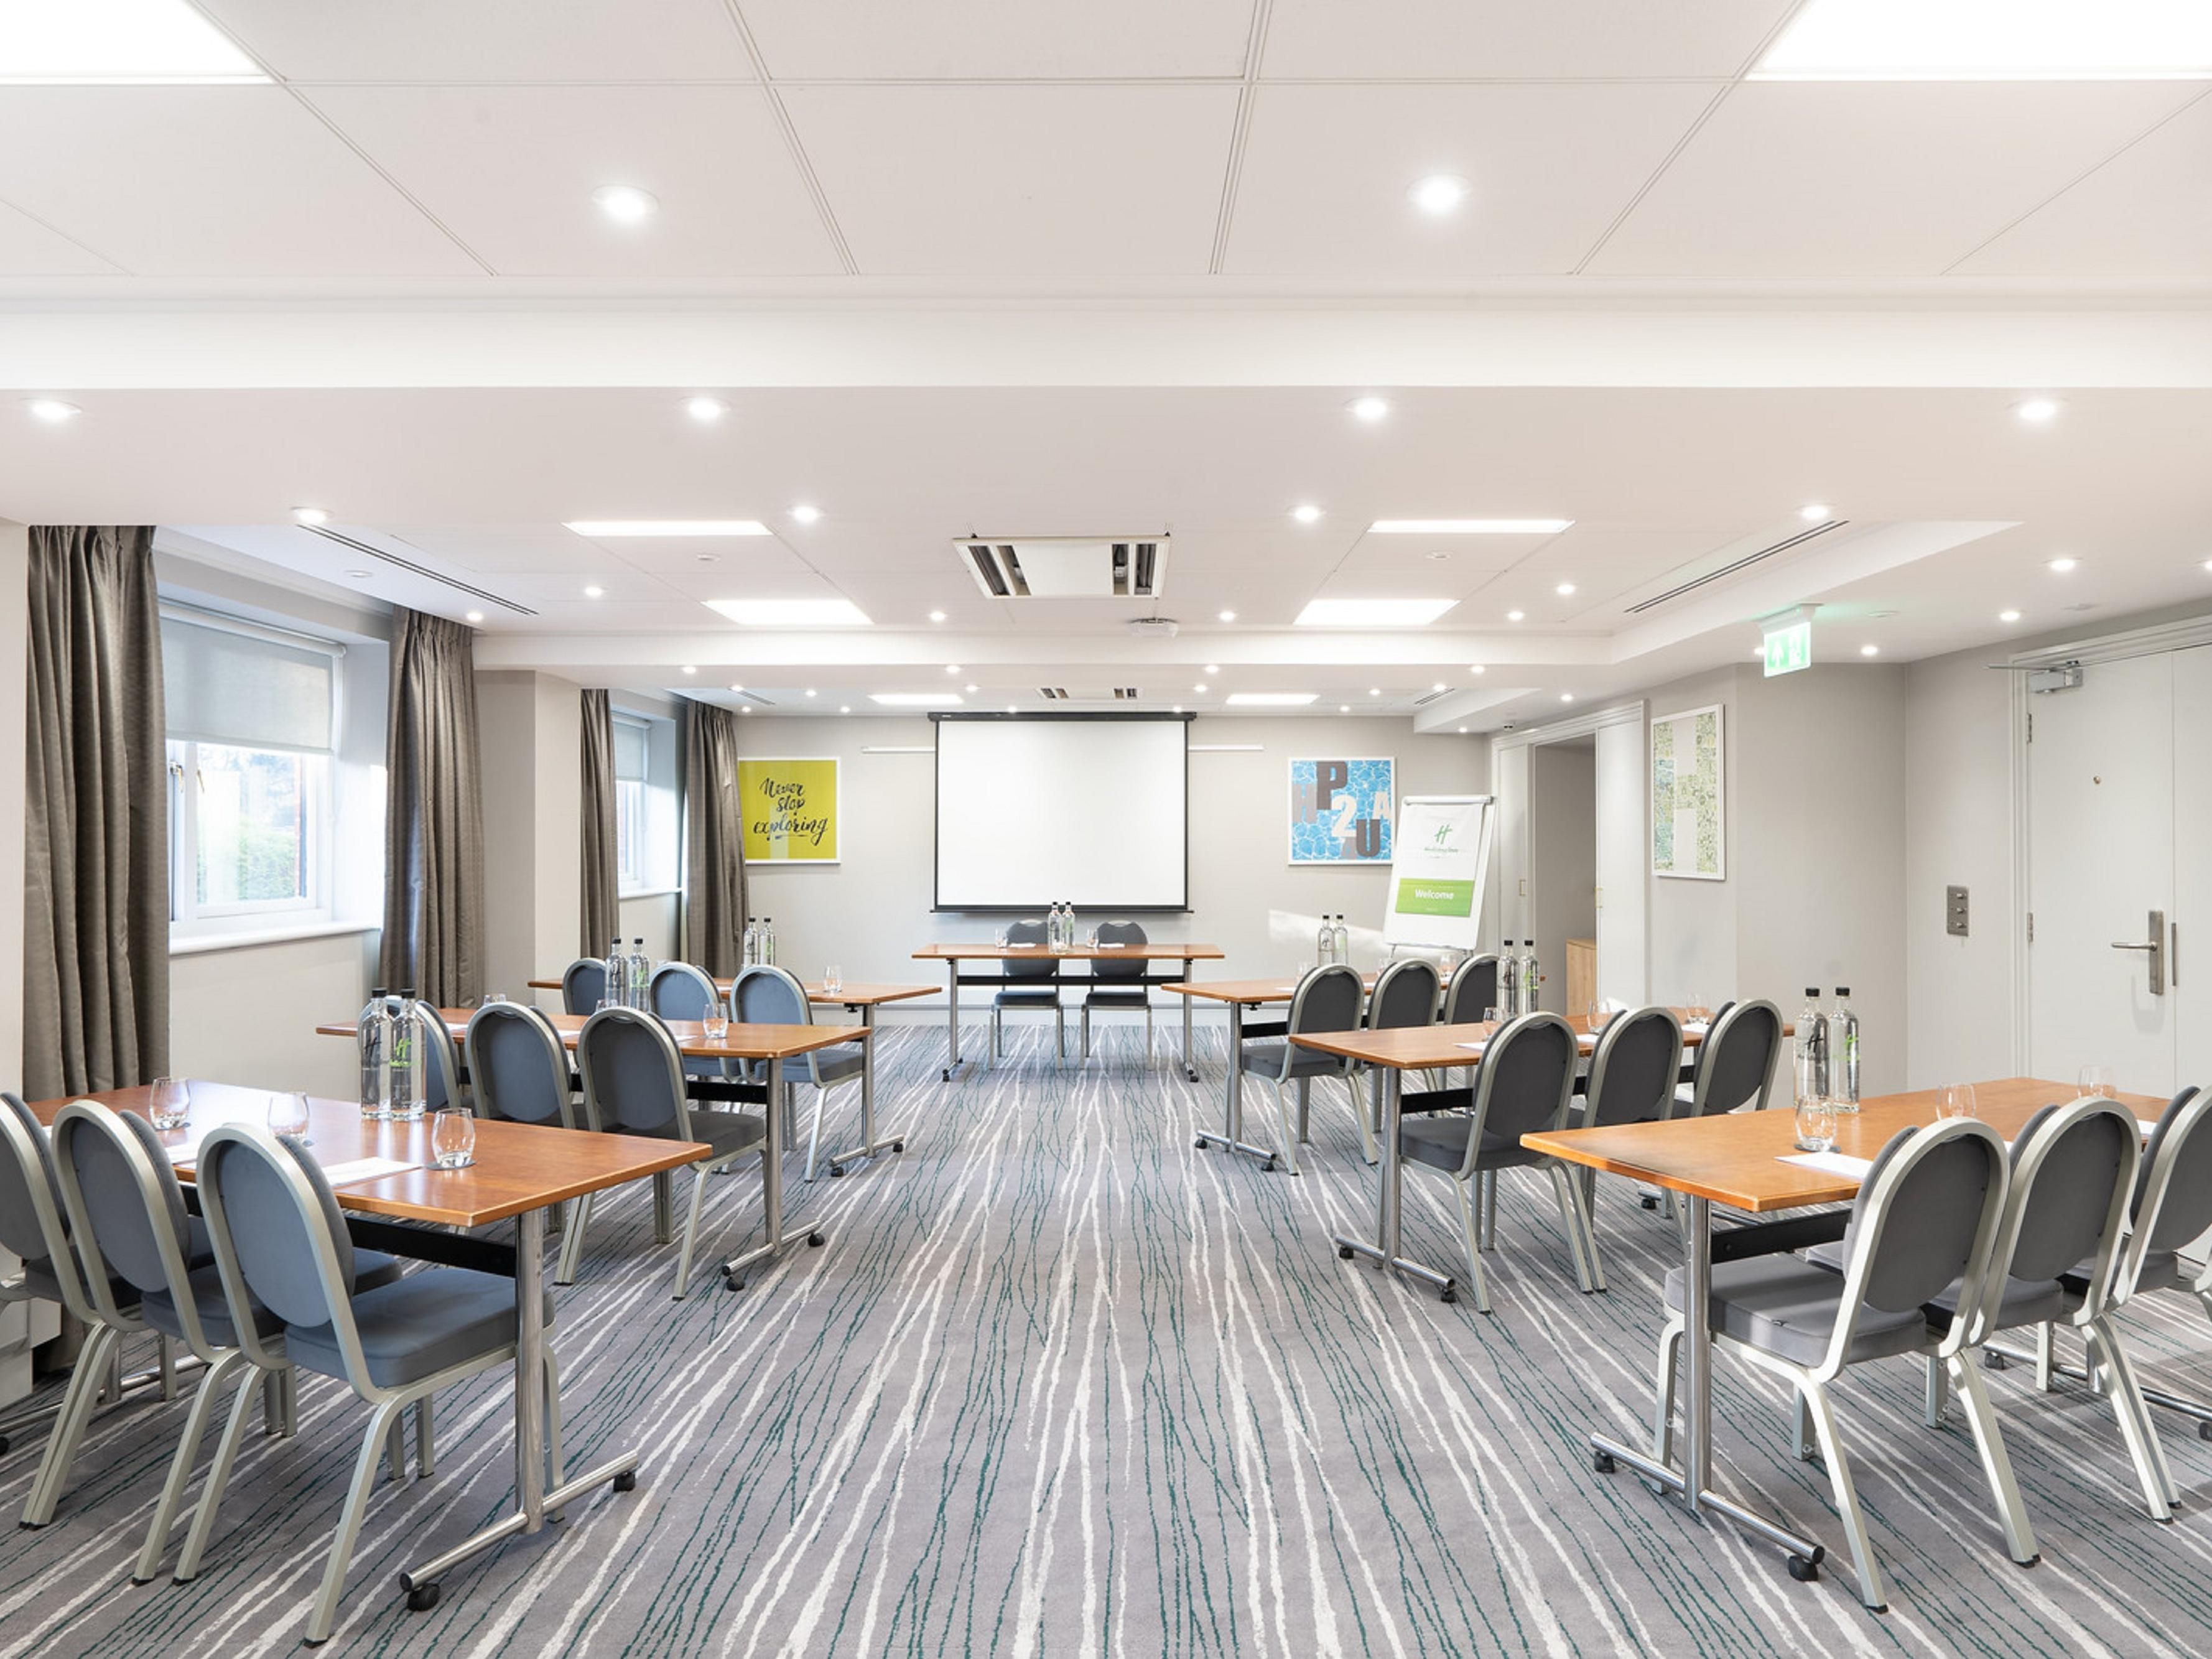 The hotel offers 7 meeting rooms, with capacities ranging from 2 to 120.
Expect great service, wonderful food selections and all your AV needs.
From conferences to gala dinners our flexible space is flooded with natural daylight and equipped for your next event!